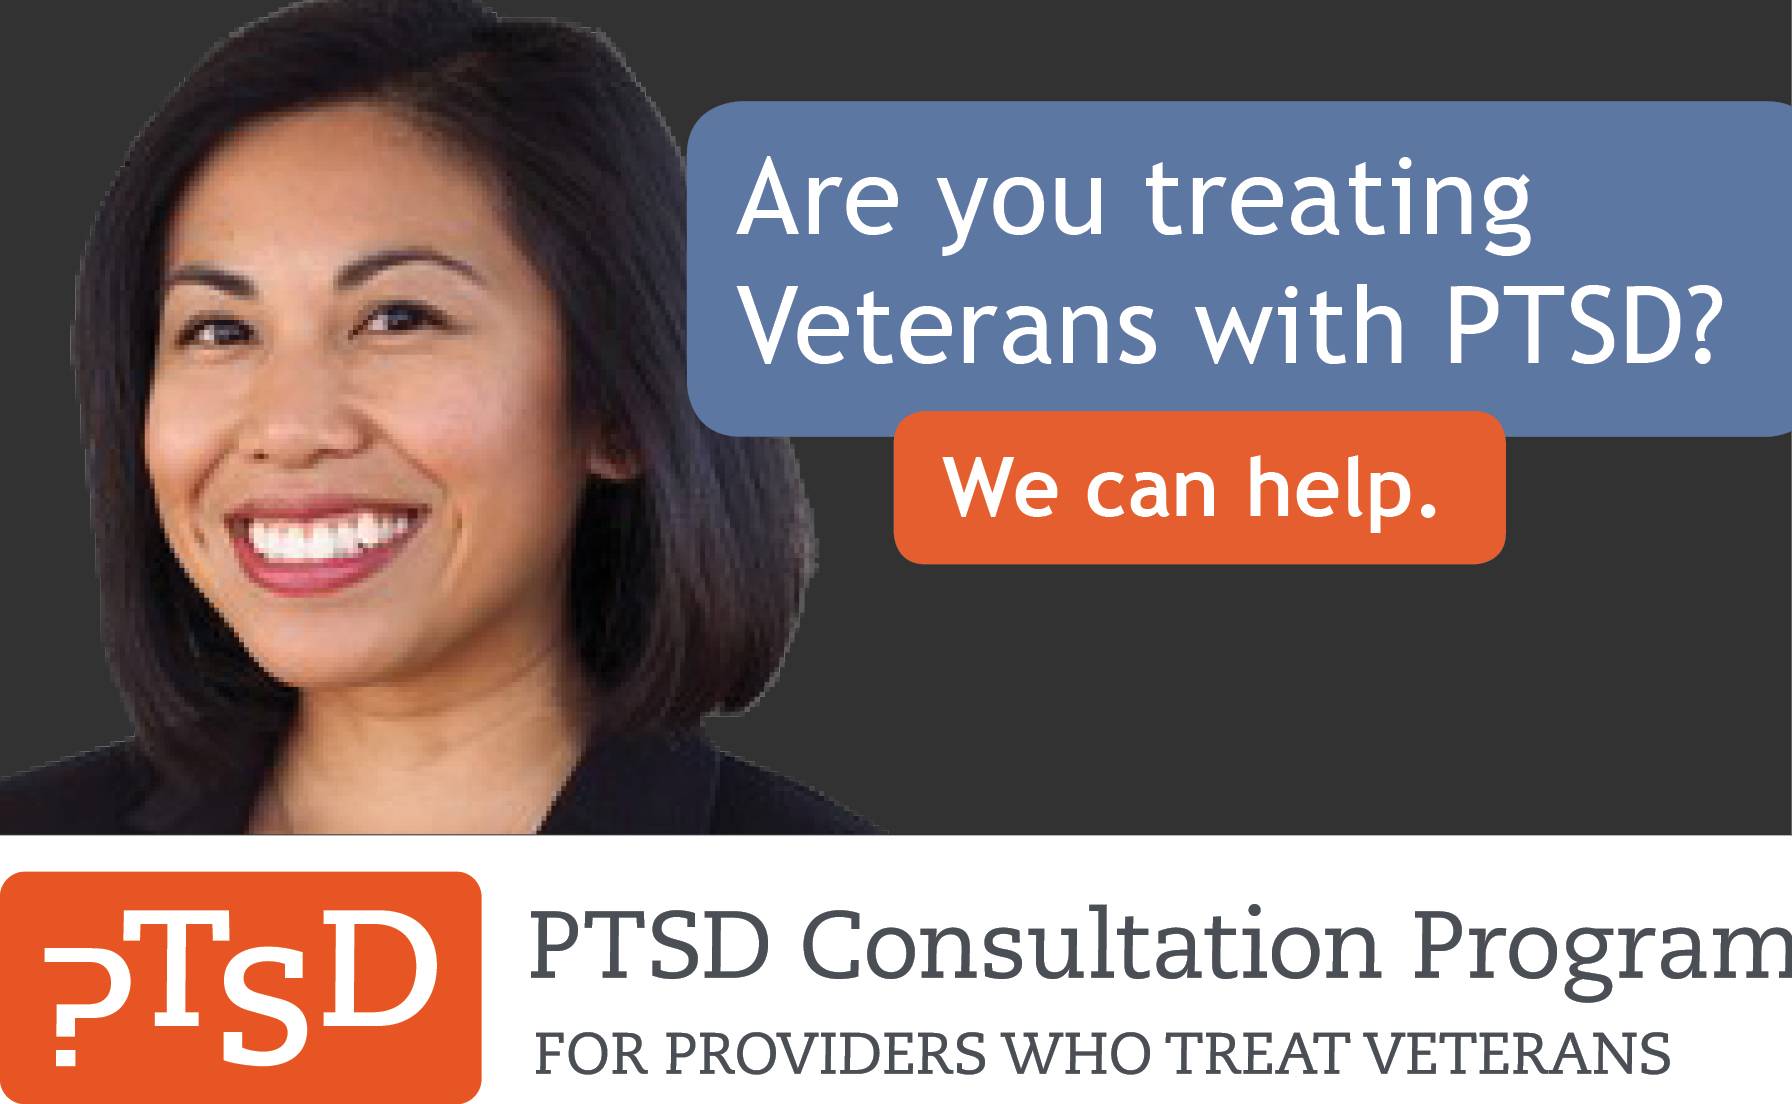 Are you treating Veterans with PTSD? We can help. PTSD Consultation Program for providers who treat veterans.